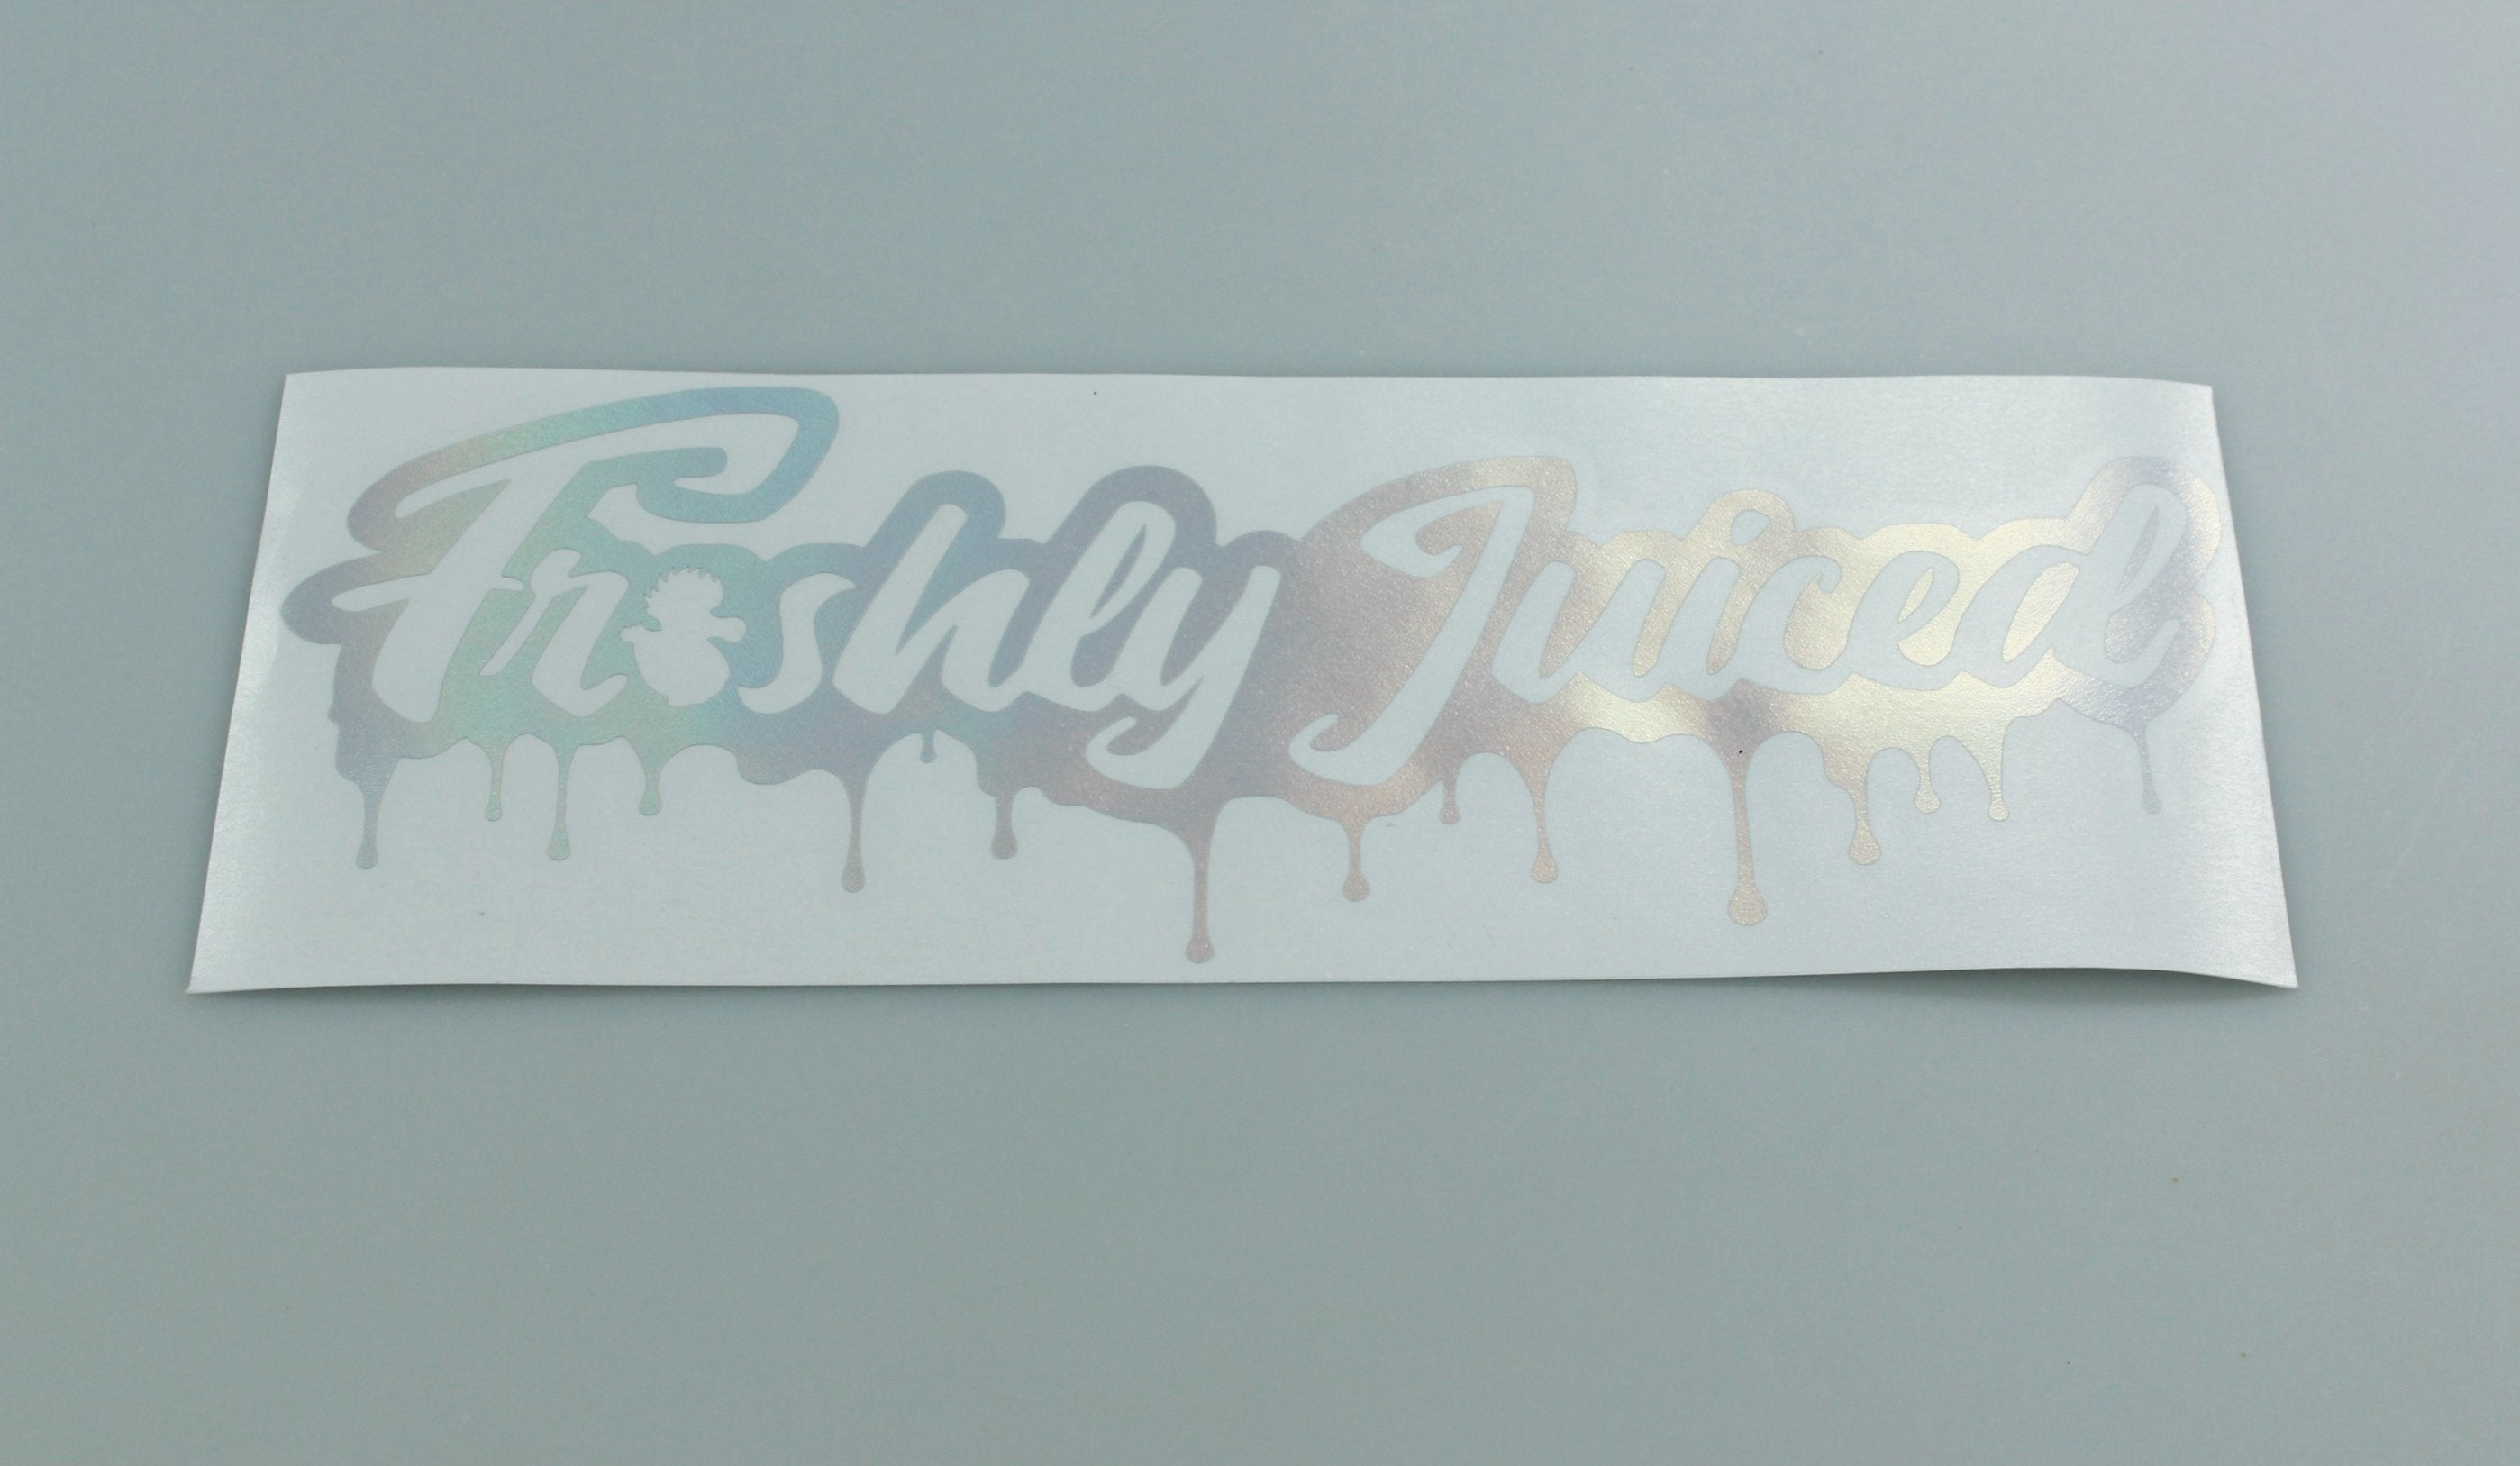 Freshly Juiced "Dripping with Freshness" vinyl scene stickers (11 colourways available) HS 4911990000